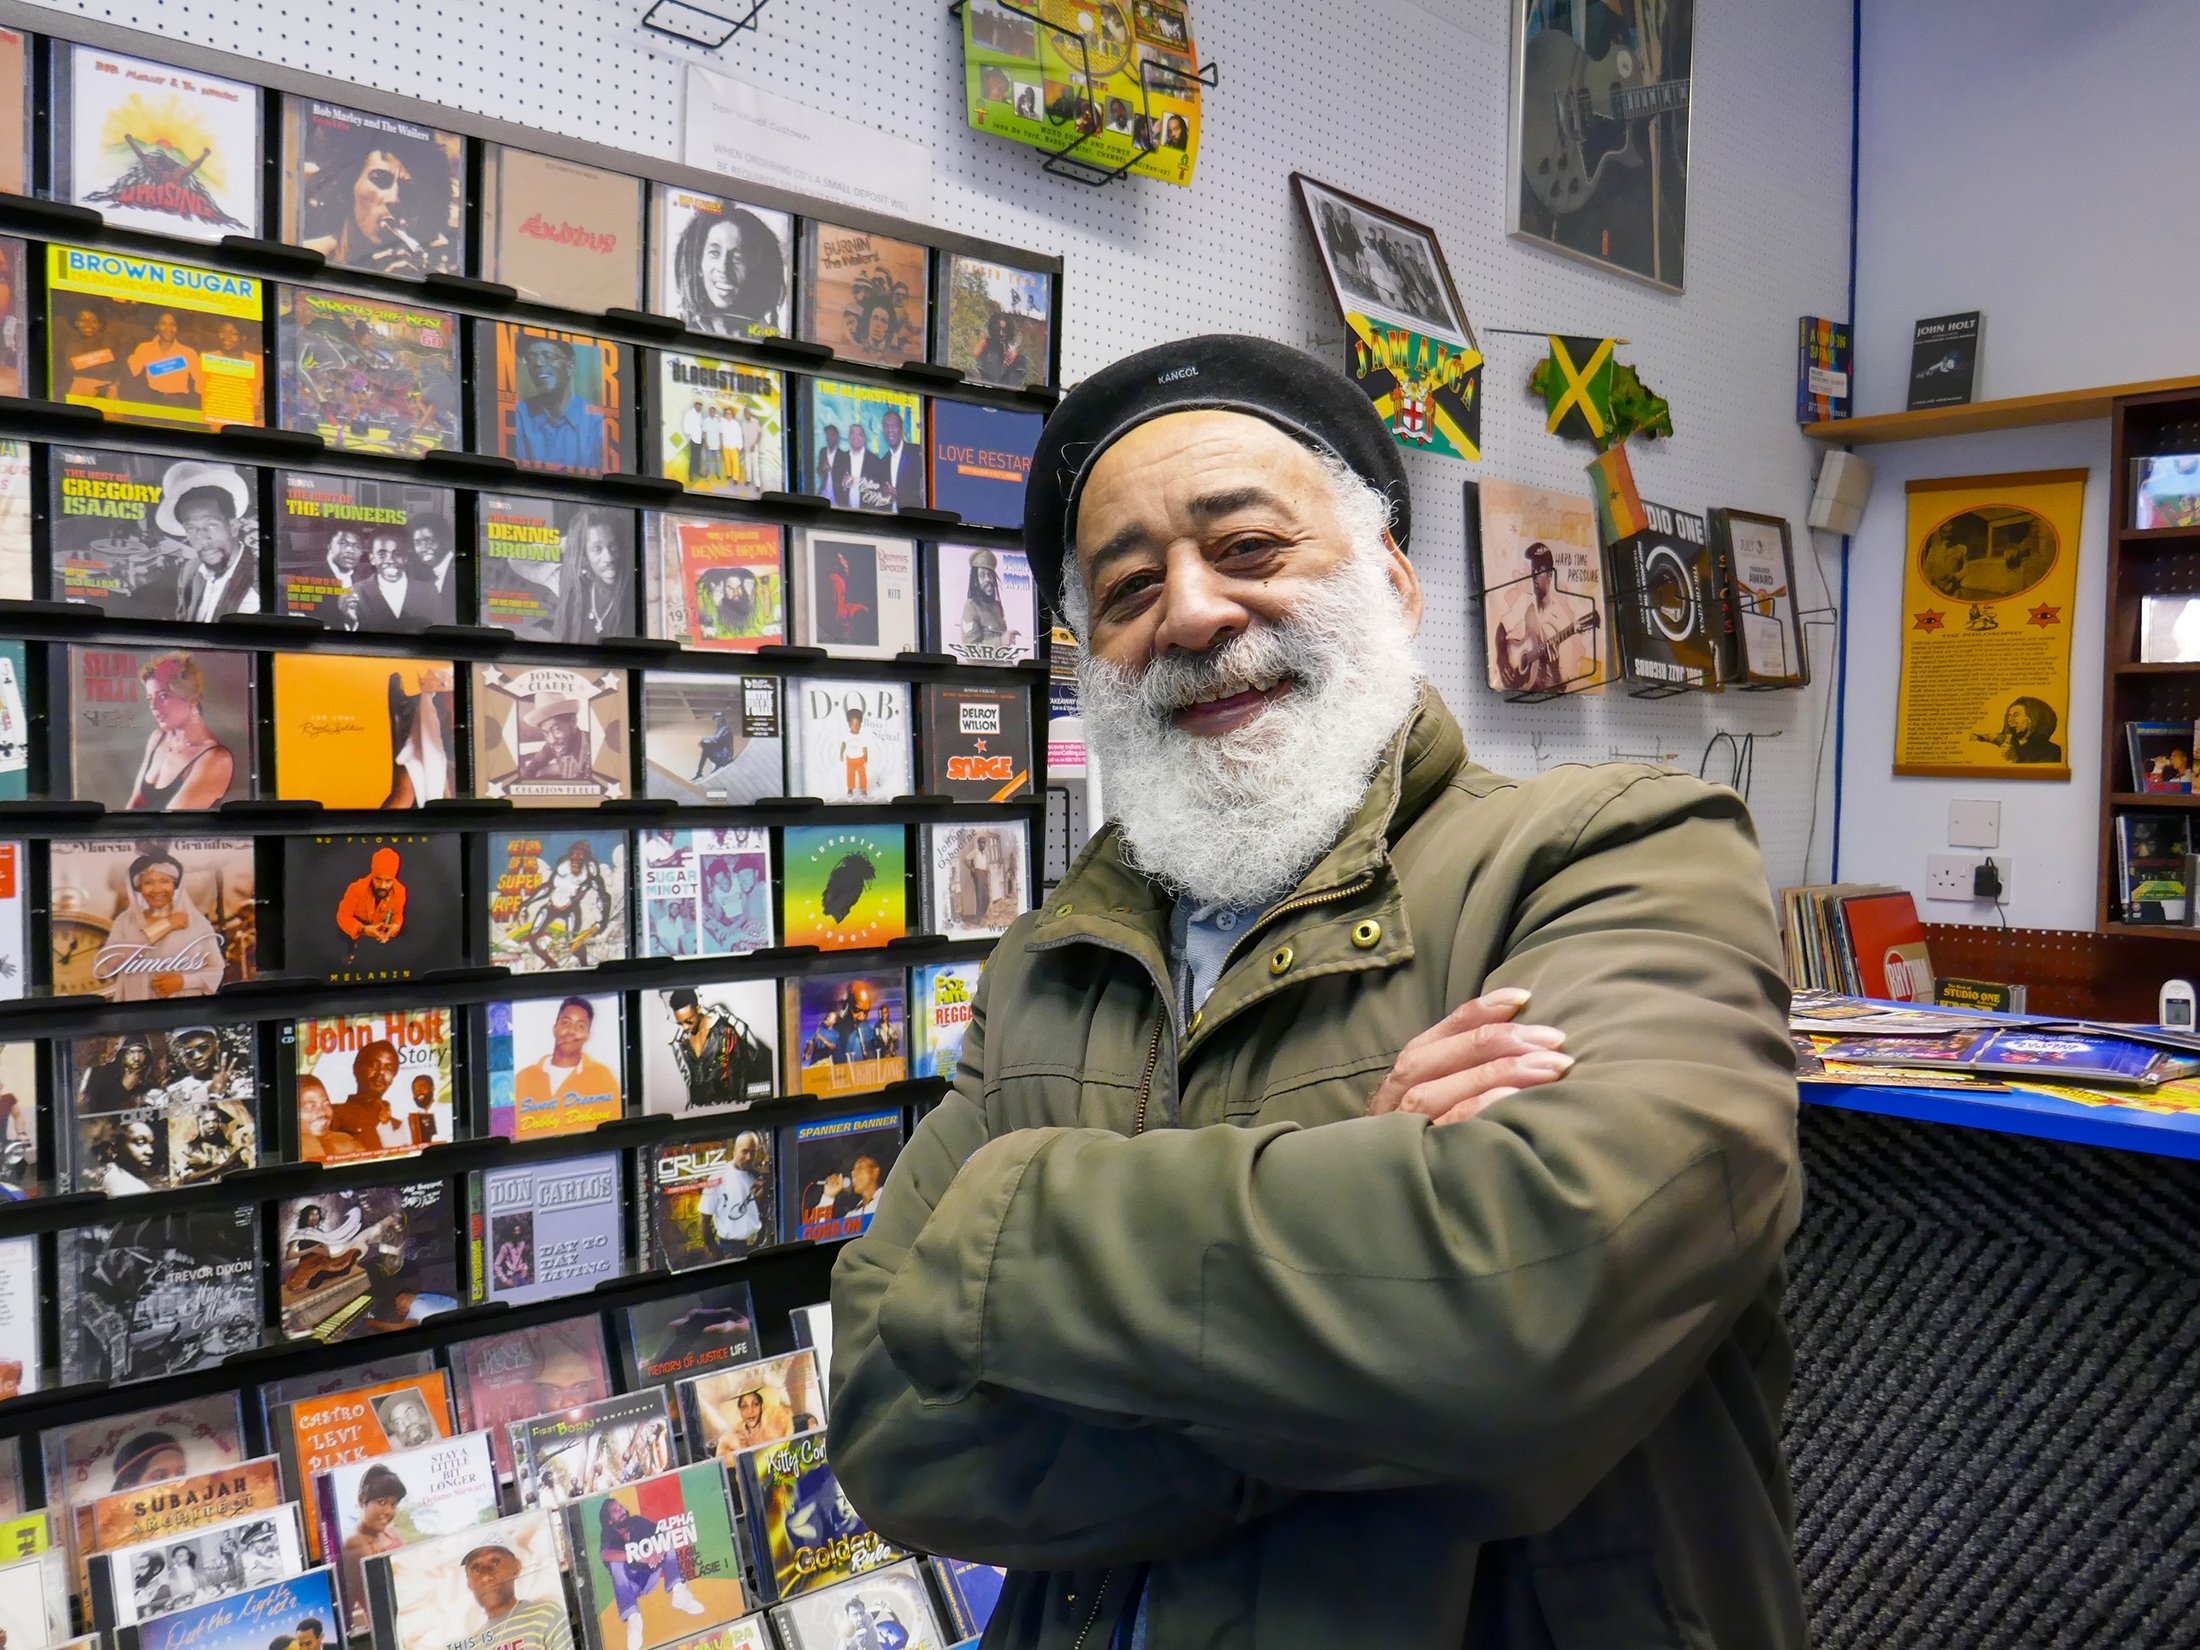 Popsie Deer, the owner of Starlight Records, who used to go on tour with Bob Marley, poses at his shop. (dpa Photo)